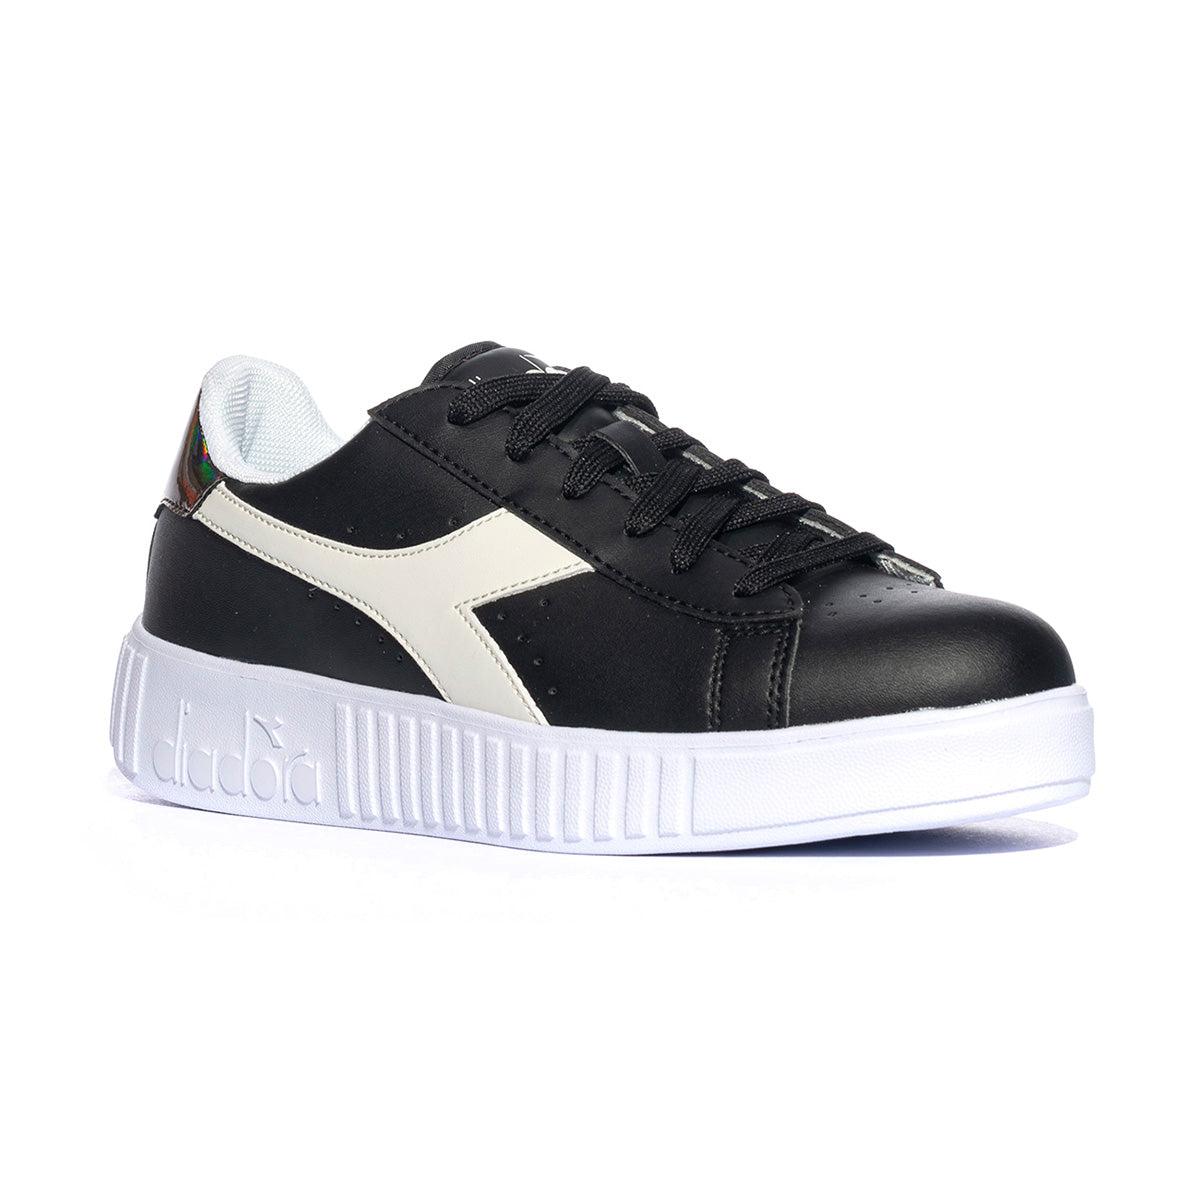 Sneakers Diadora Game Step Bianche Nere